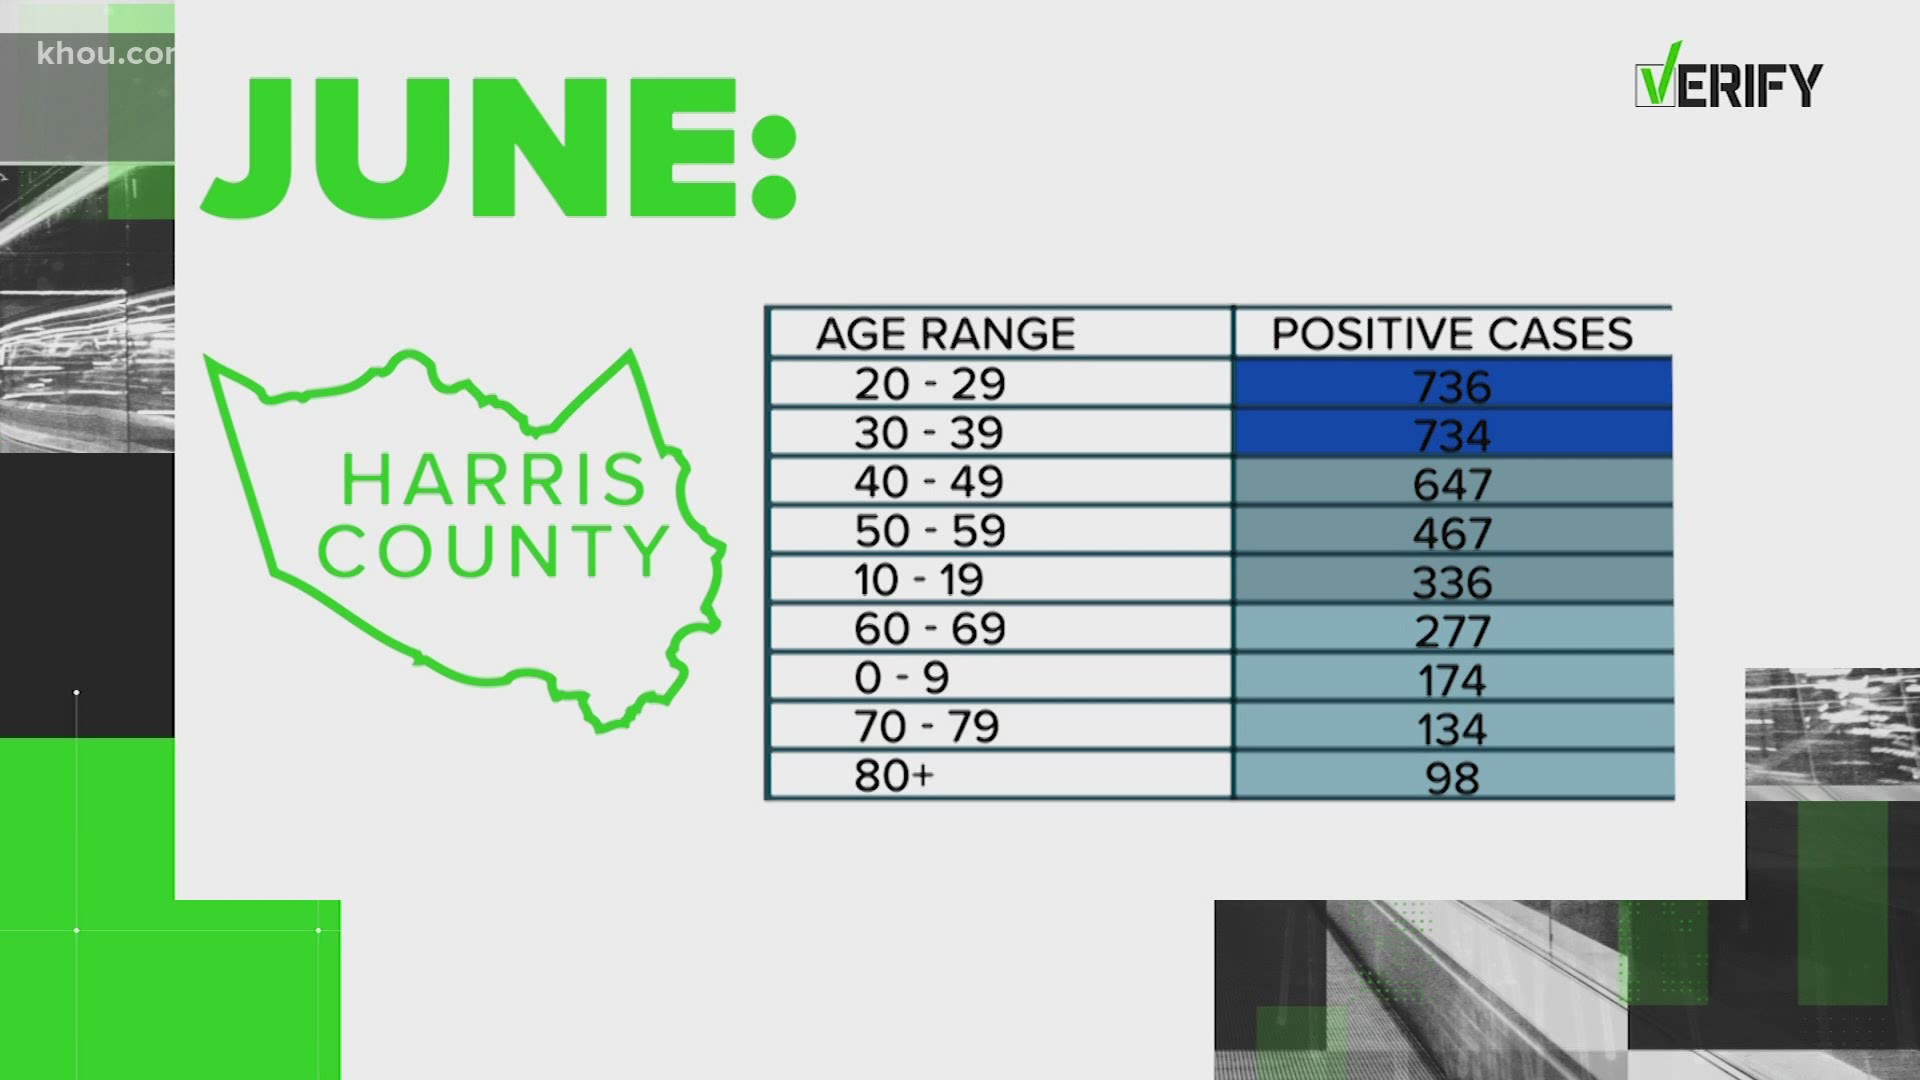 So far this month, most people testing positive in Harris County are 20-29 years old.